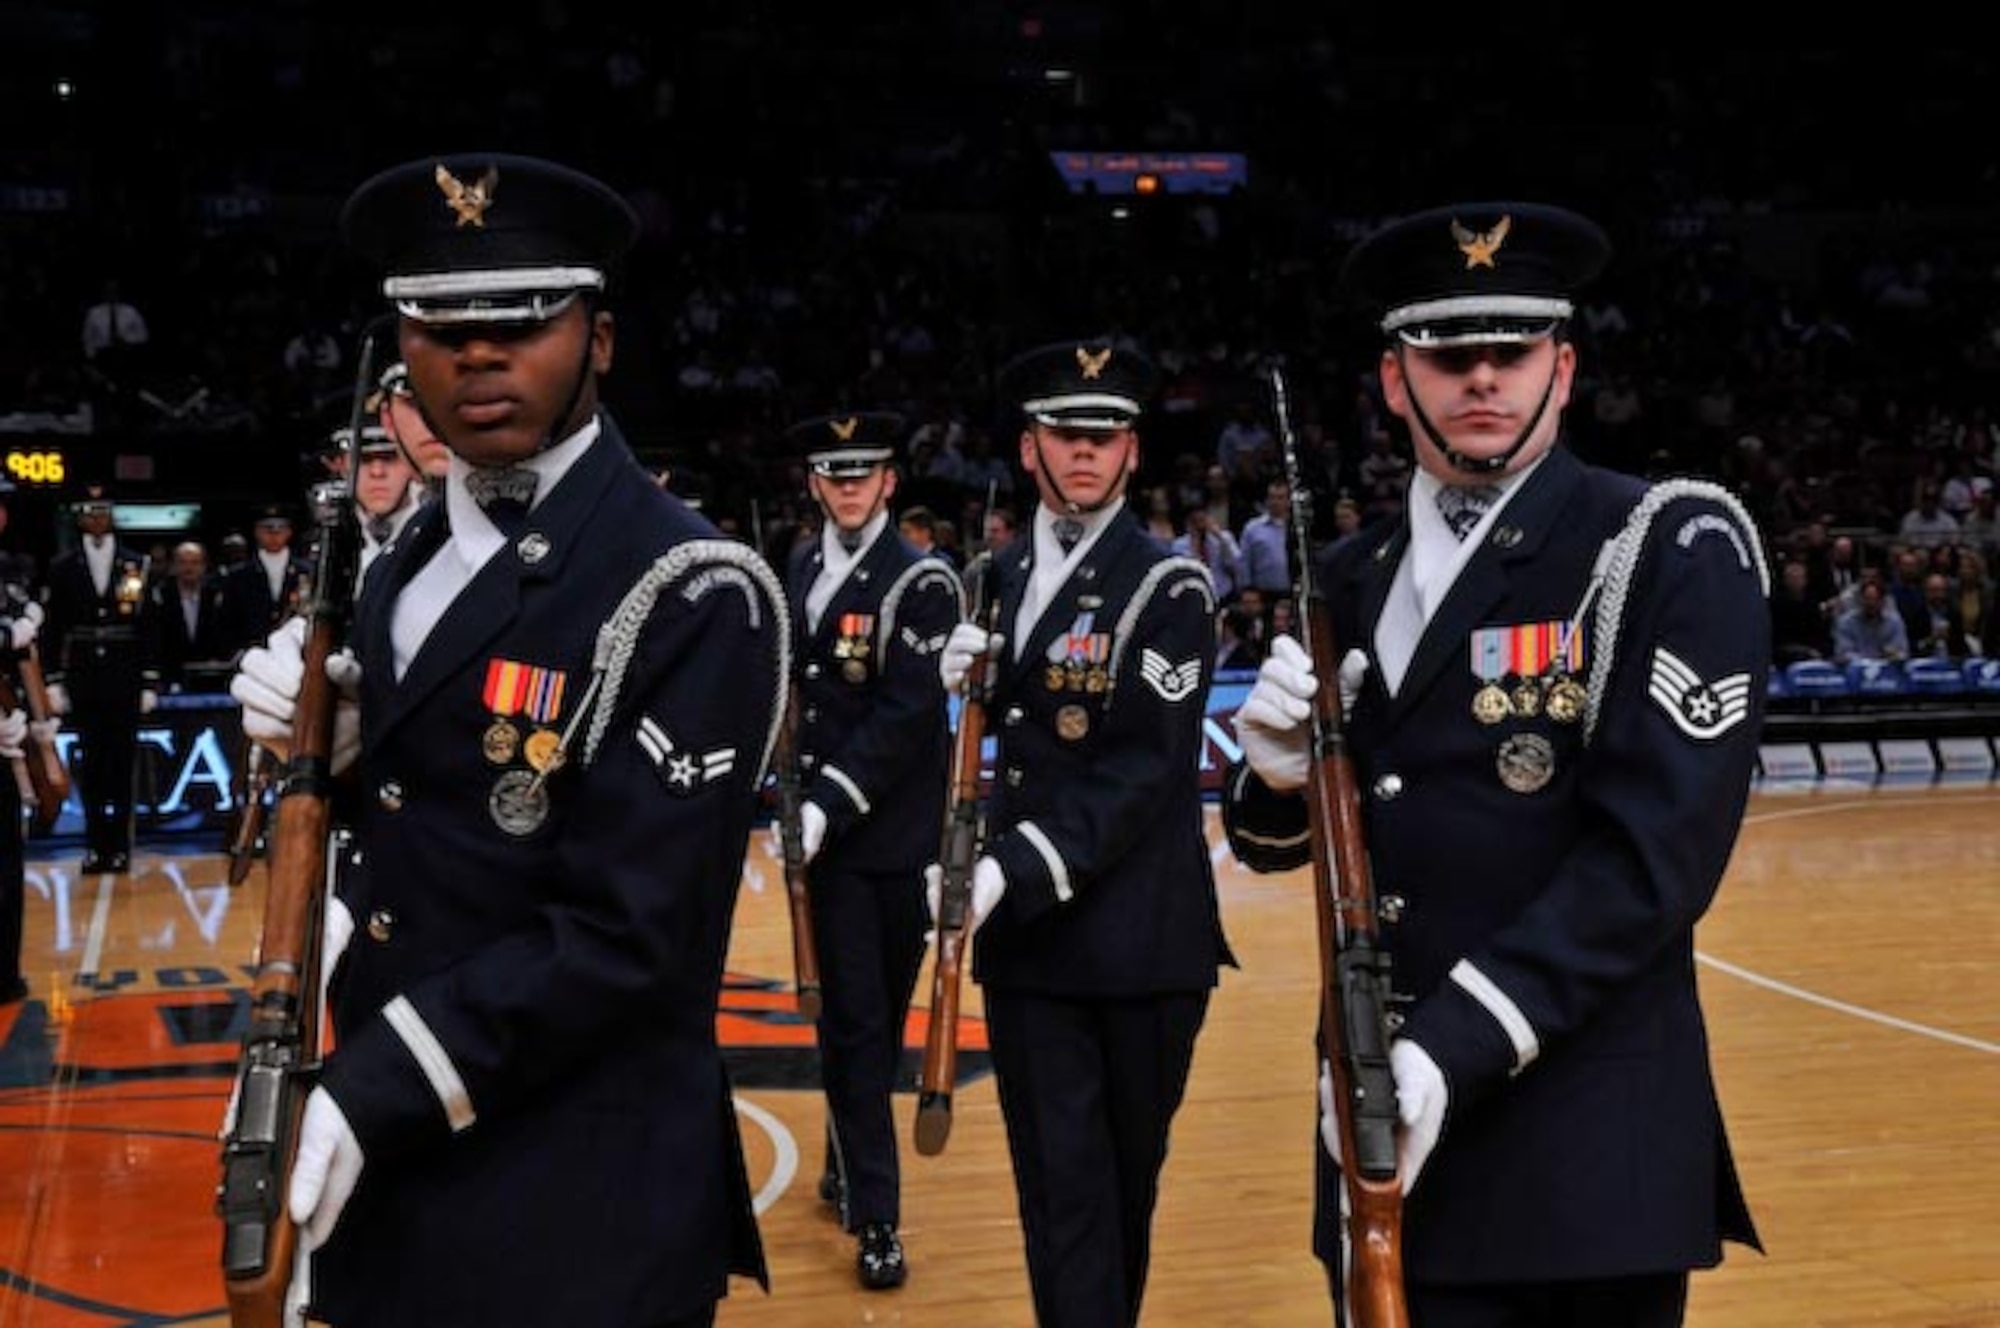 Airman 1st Class Doyle Boyd and Staff Sgt. Adam Clonick, United States Air Force Honor Guard Drill Team members, perform the matrix meat grinder, one of many drill movements, during the New York Knick’s halftime show during Military Appreciation Night at New York’s Madison Square Garden Nov. 11. The Drill Team is the traveling component of the U.S. Air Force Honor Guard and tours worldwide representing all Airmen while showcasing Air Force precision and professionalism. (U.S. Air Force photo by Senior Airman Marleah Miller)